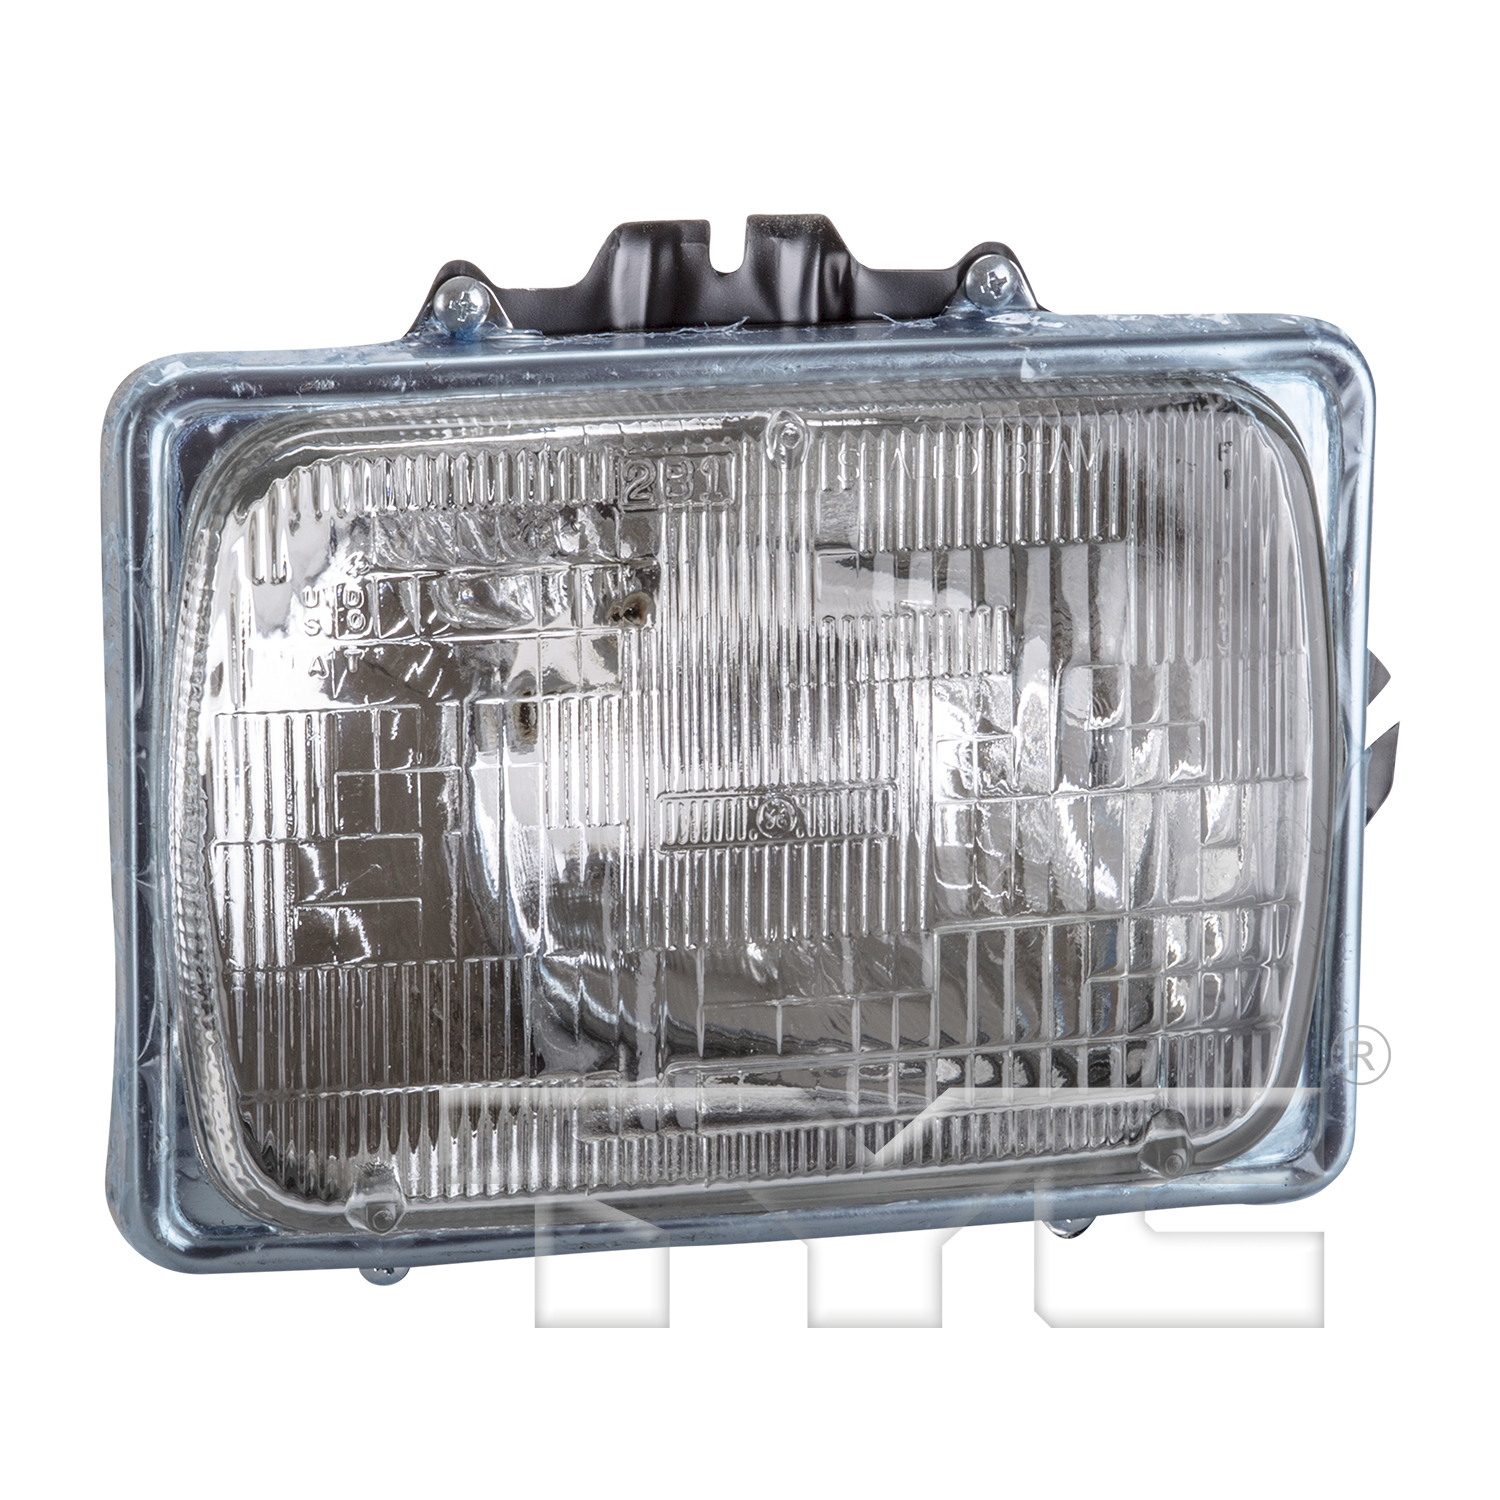 Aftermarket HEADLIGHTS for FORD - E-450 ECONOLINE SUPER DUTY, E-450 ECONOLINE SUPER DUTY,99-02,RT Headlamp assy sealed beam